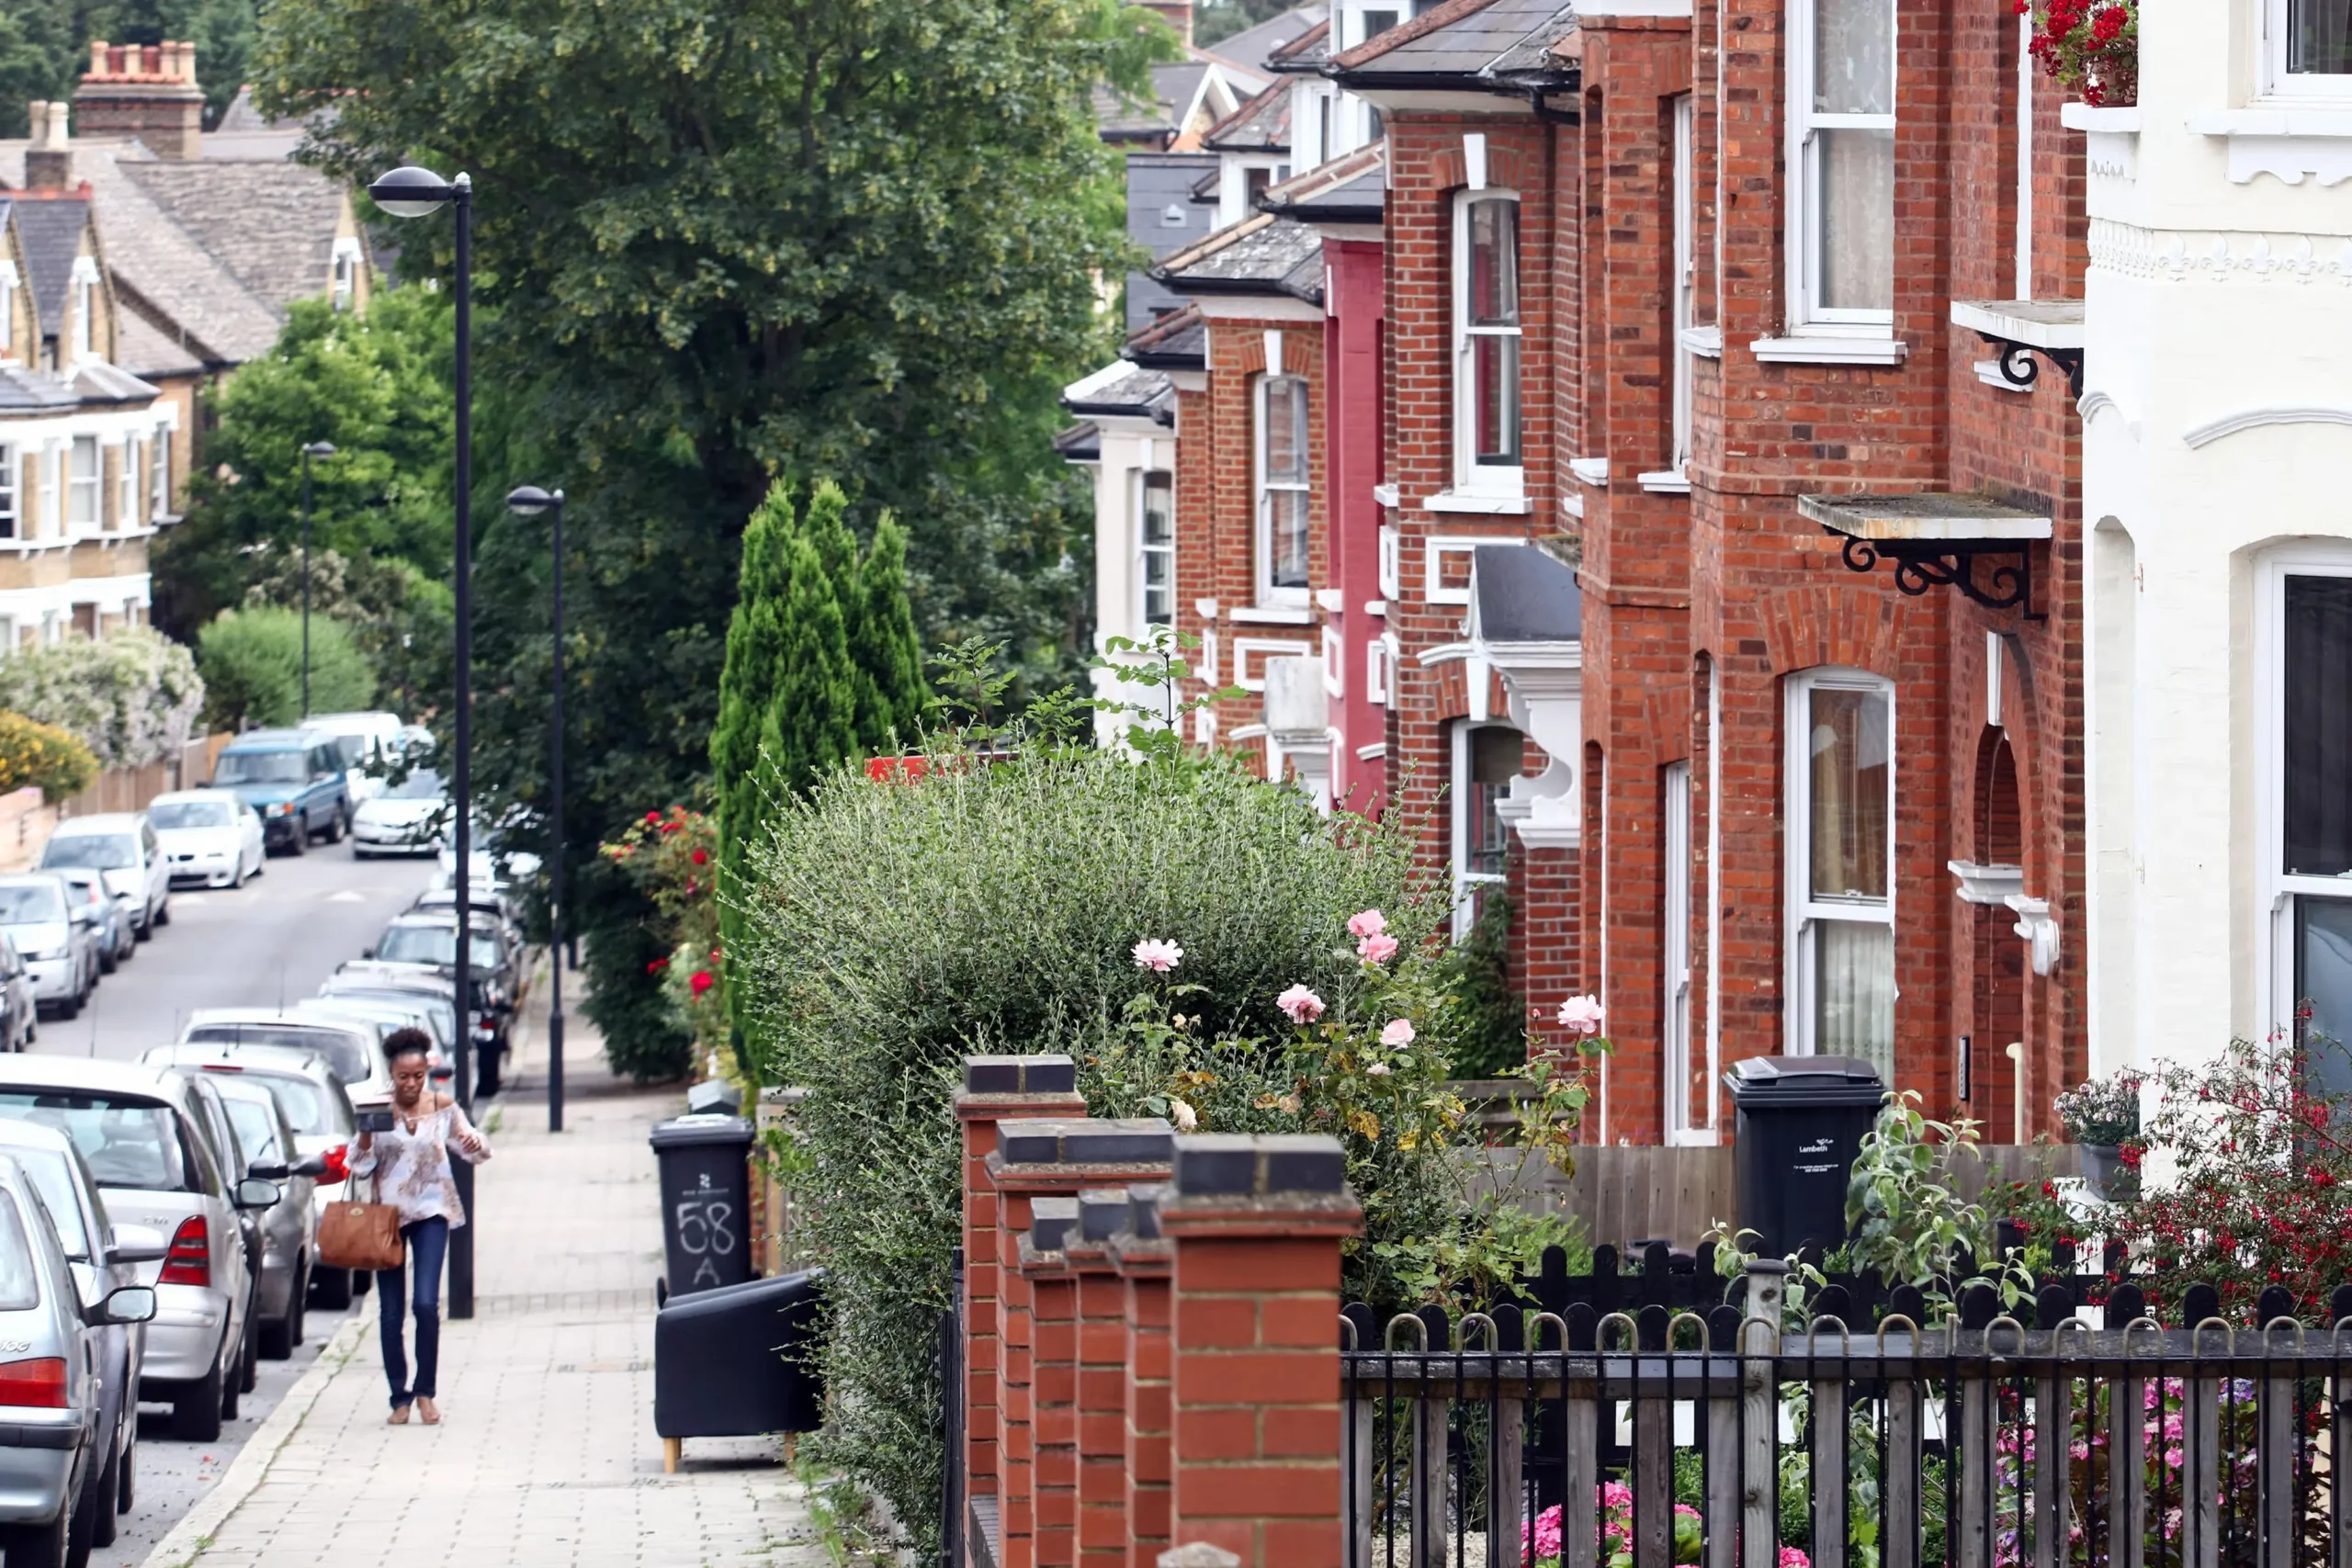 UK House Hunters Speed Up Plans to Beat Price Hike, Survey Says